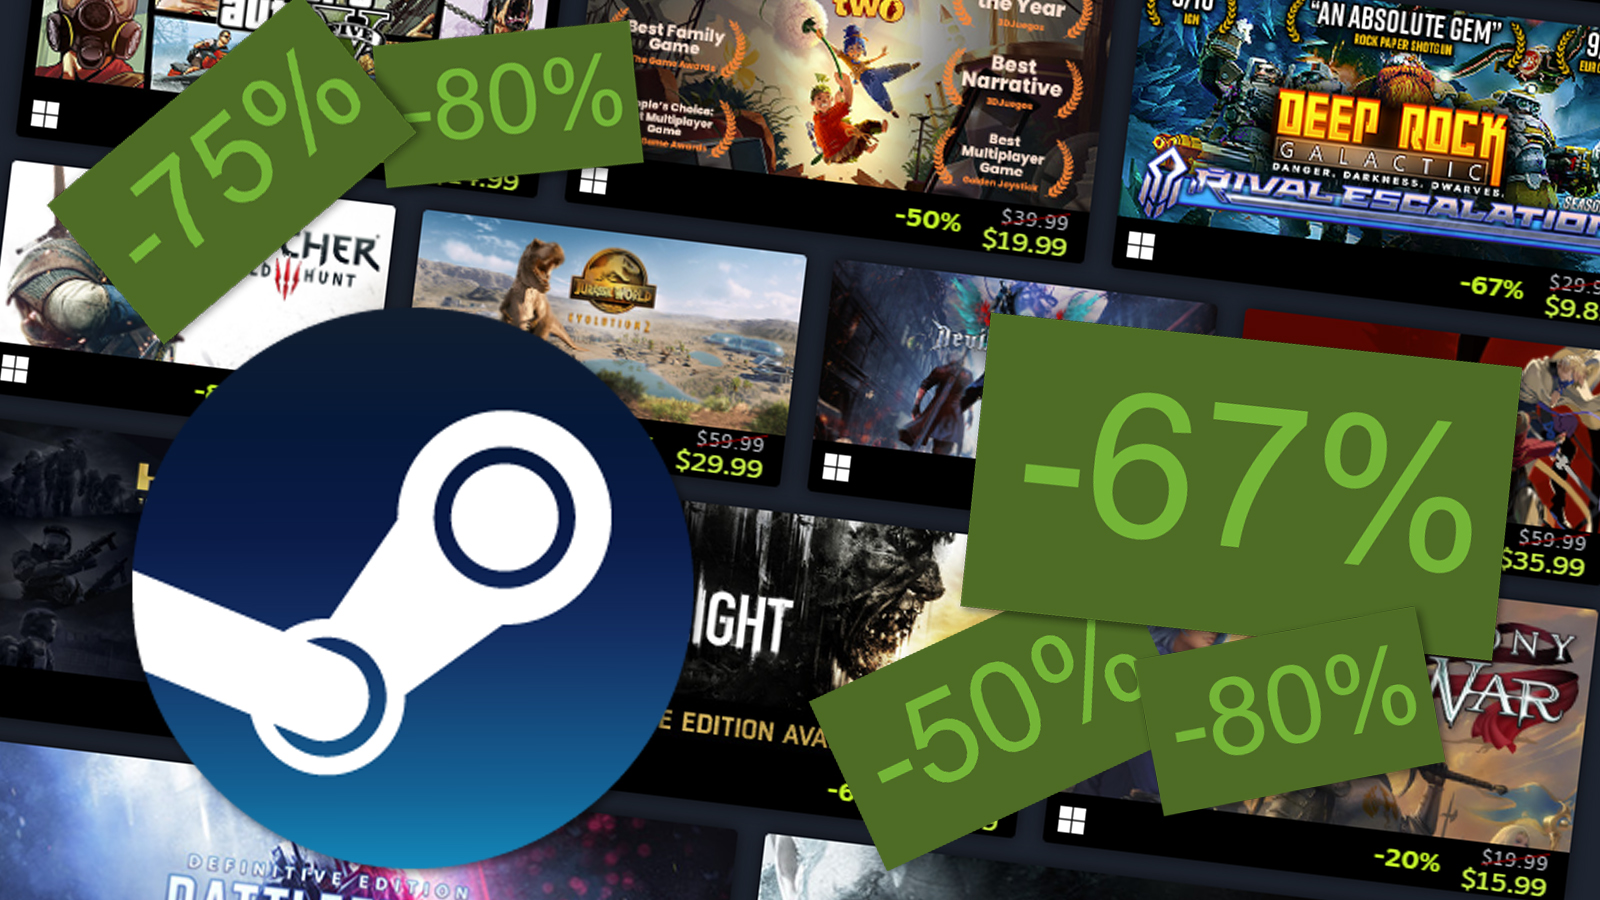 Every Steam Game Bundle You Can Buy Now At Fanatical And Humble - GameSpot